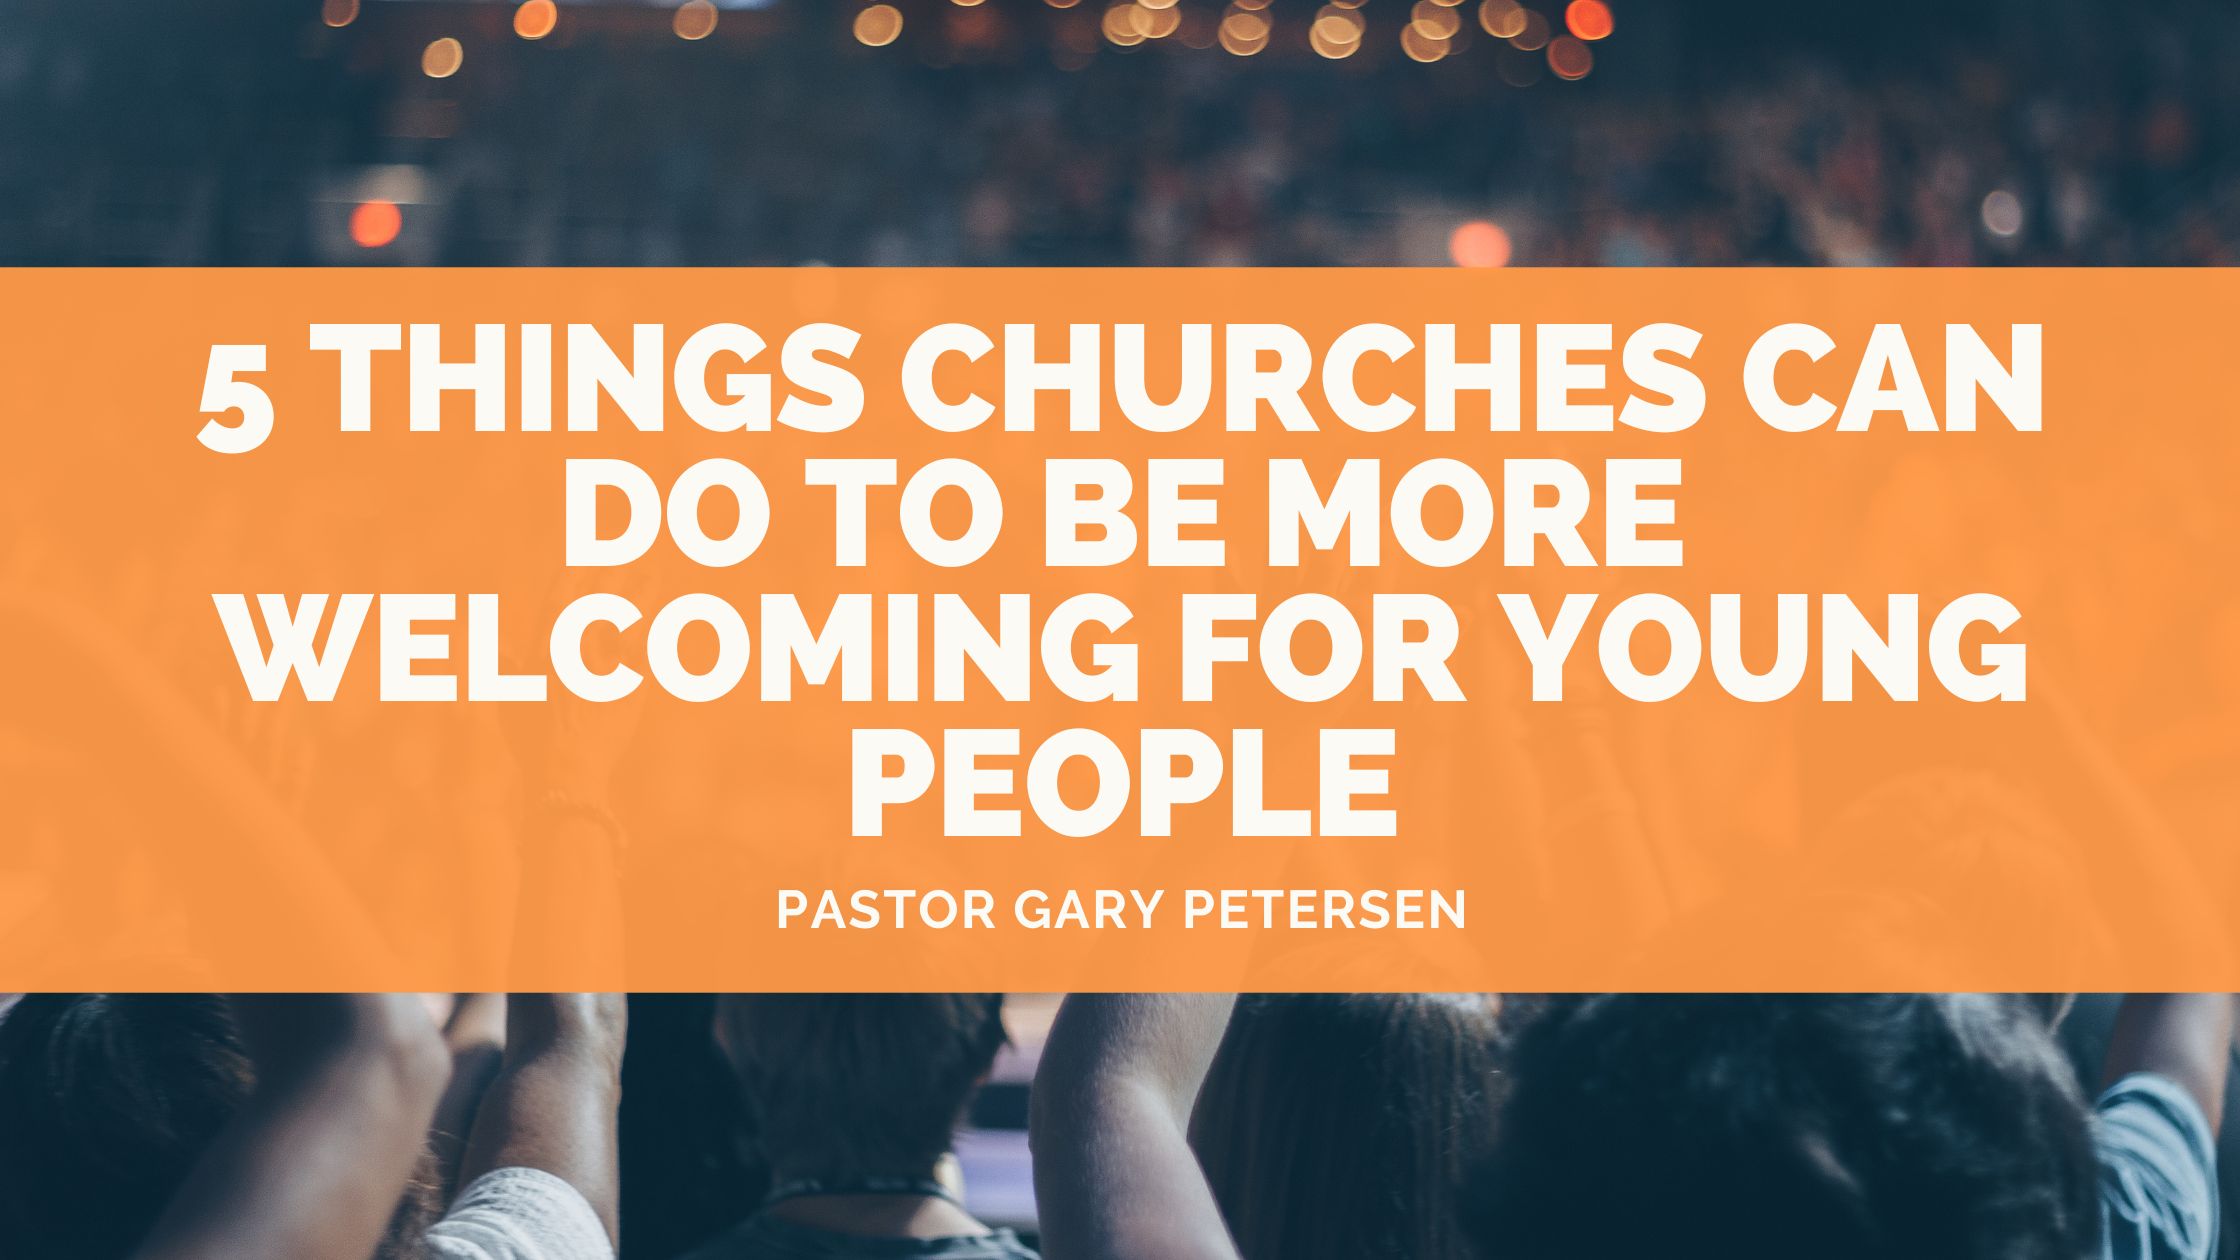 5 Things Churches Can Do to Be More Welcoming for Young People